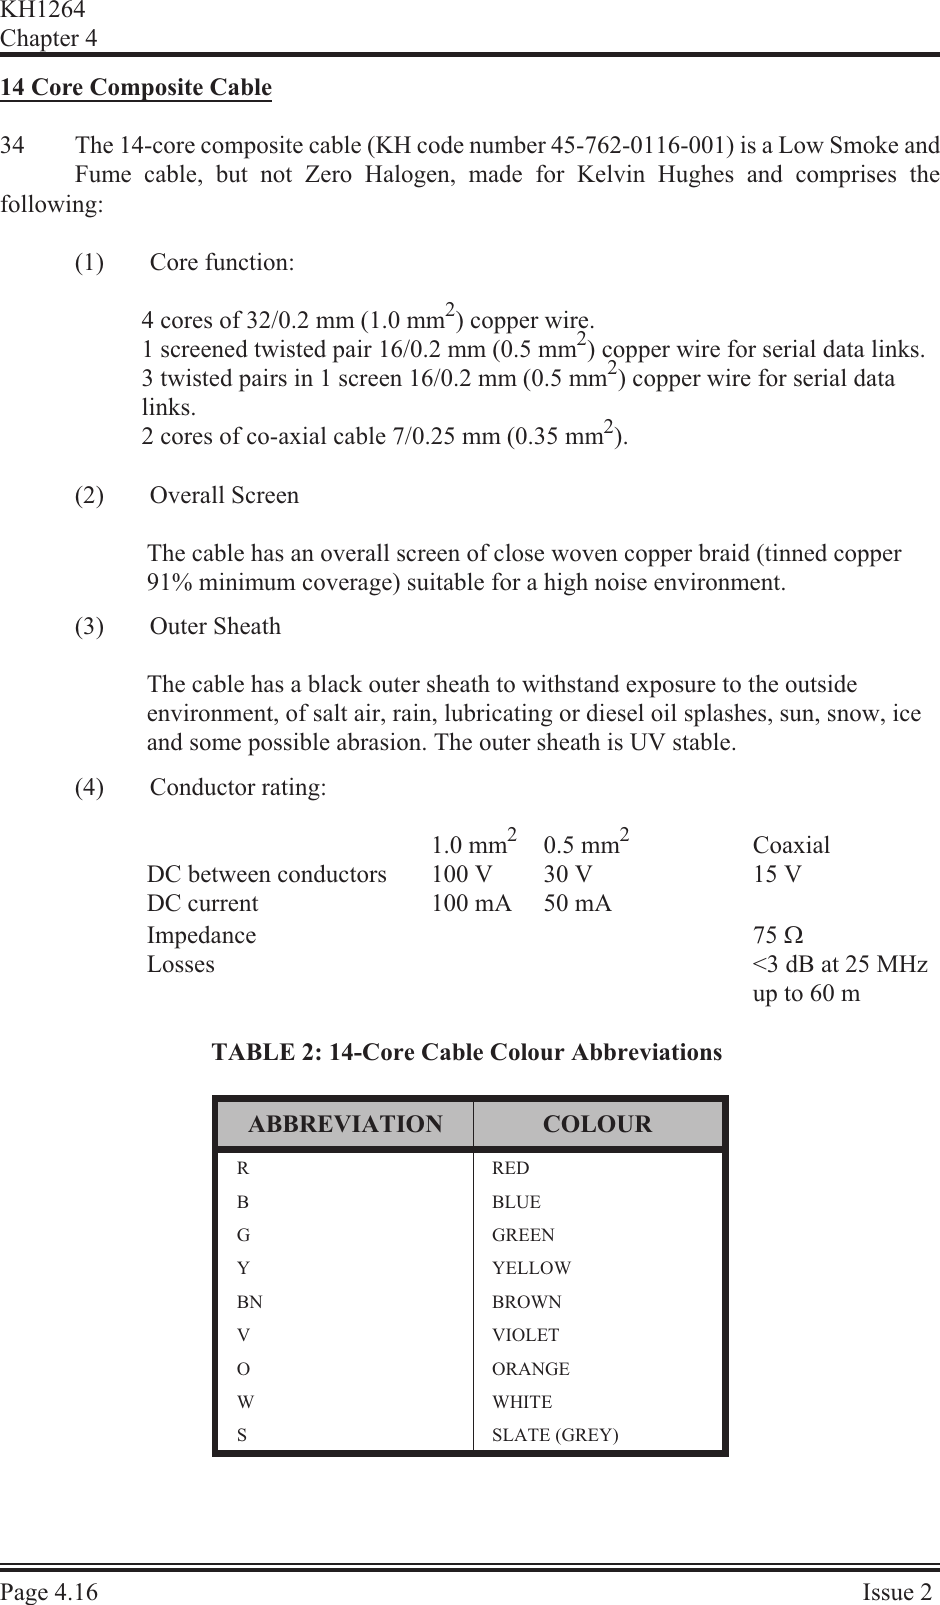 14 Core Com pos ite Ca ble34 The 14-core composite cable (KH code number 45-762-0116-001) is a Low Smoke andFume cable, but not Zero Halogen, made for Kelvin Hughes and comprises thefollowing:(1) Core function:4 cores of 32/0.2 mm (1.0 mm2) copper wire.1 screened twisted pair 16/0.2 mm (0.5 mm2) copper wire for serial data links.3 twisted pairs in 1 screen 16/0.2 mm (0.5 mm2) copper wire for serial data links.2 cores of co-axial cable 7/0.25 mm (0.35 mm2).(2) Overall ScreenThe cable has an overall screen of close woven copper braid (tinned copper 91% minimum coverage) suitable for a high noise environment.(3) Outer SheathThe cable has a black outer sheath to withstand exposure to the outside environment, of salt air, rain, lubricating or diesel oil splashes, sun, snow, ice and some possible abrasion. The outer sheath is UV stable.(4) Conductor rating:1.0 mm20.5 mm2CoaxialDC between conductors 100 V 30 V 15 VDC current 100 mA 50 mAImpedance 75 WLosses &lt;3 dB at 25 MHzup to 60 mTABLE 2: 14-Core Cable Colour Abbreviations ABBREVIATION COLOURRREDB BLUEGGREENYYELLOWBN BROWNVVIOLETOORANGEWWHITESSLATE (GREY)KH1264Chap ter  4Page  4.16 Is sue  2